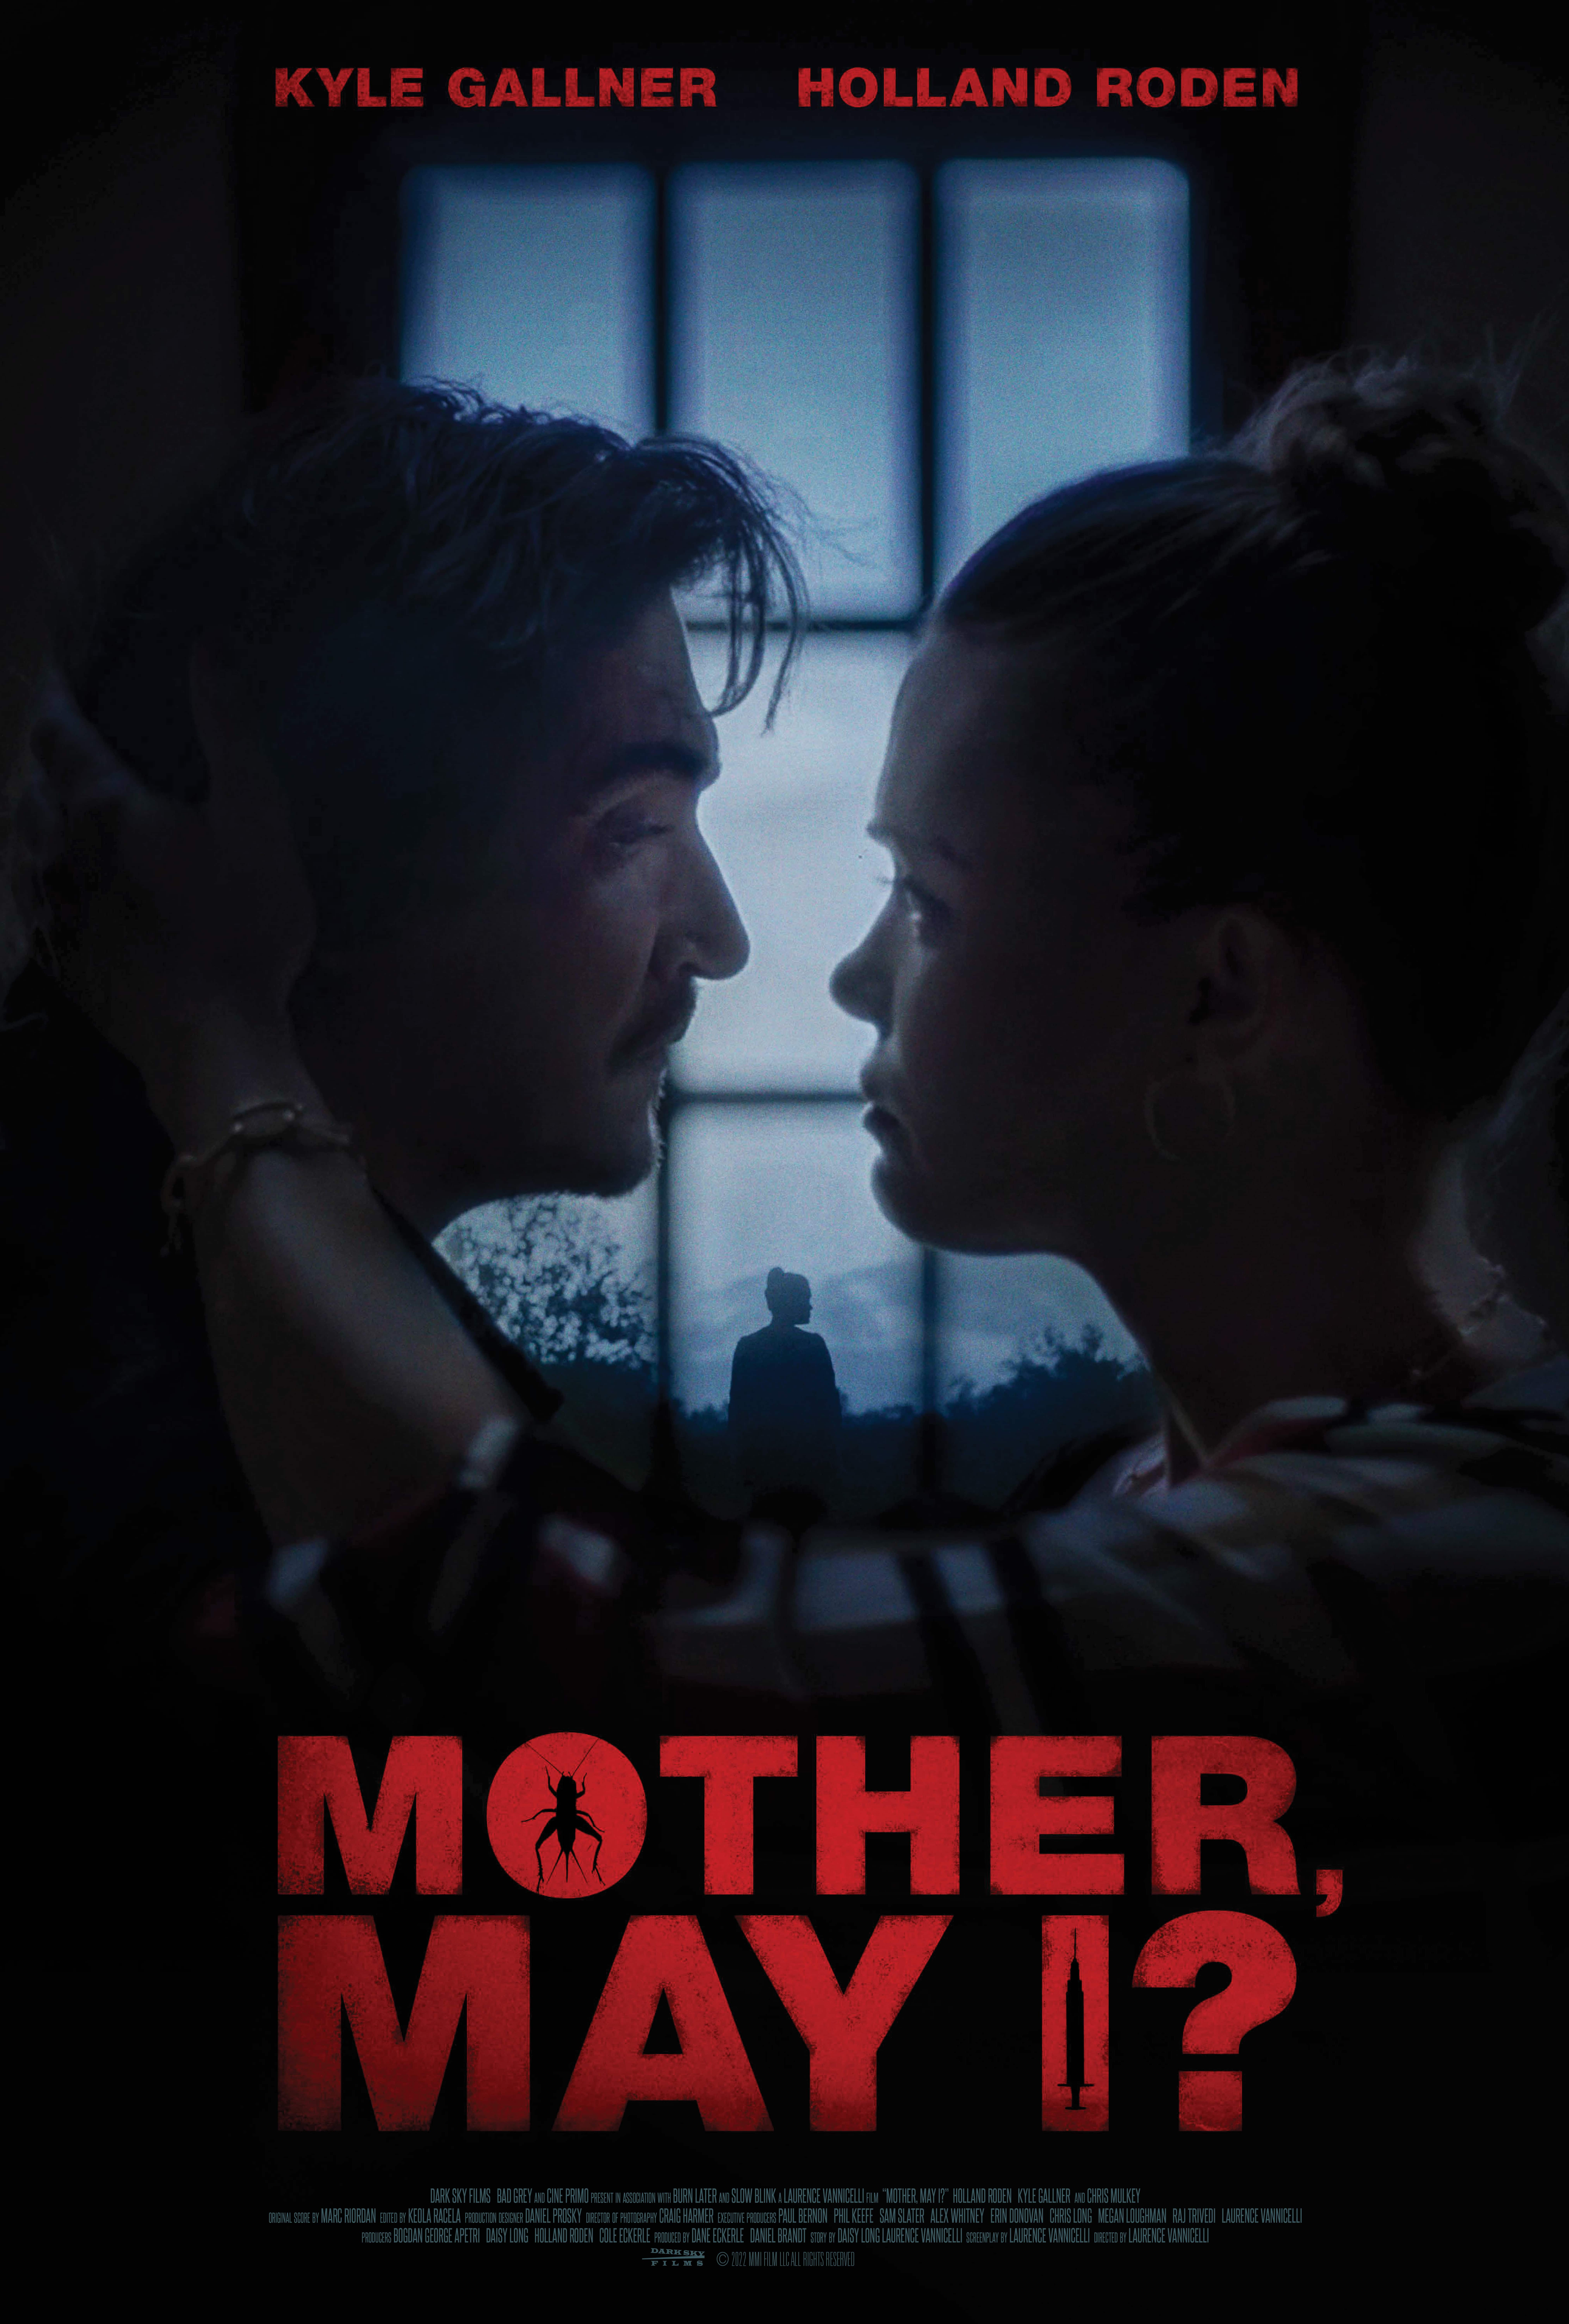 Mother, May I? - A Spine-Chilling Thriller Arriving Soon 25